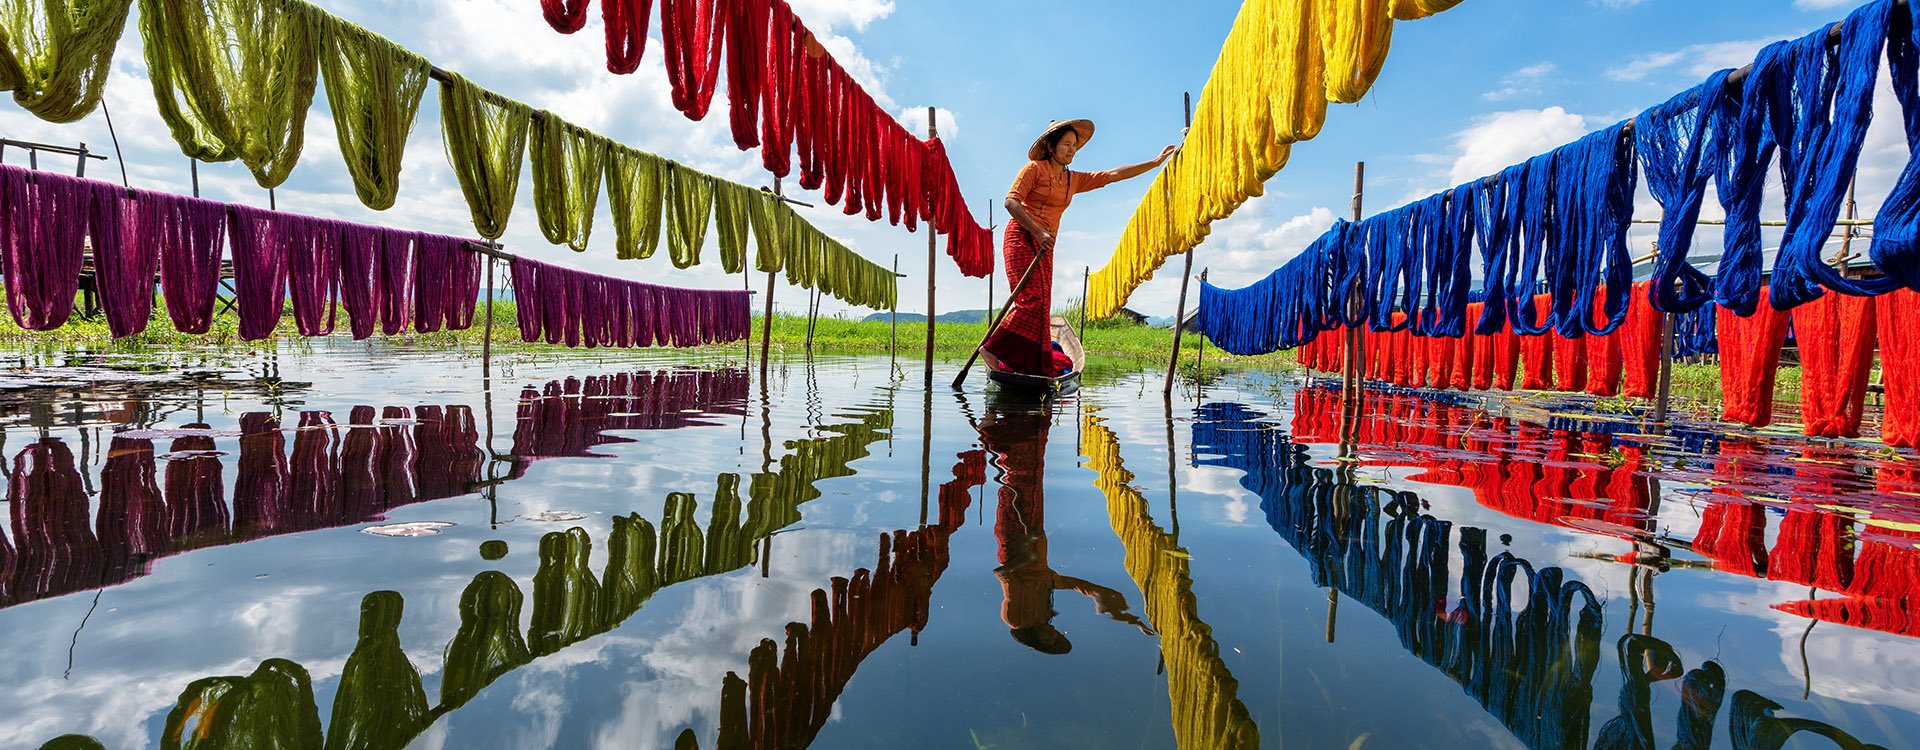 Handcrafted colorful made from lotus fibers in Inle Lake, Shan State in Myanmar